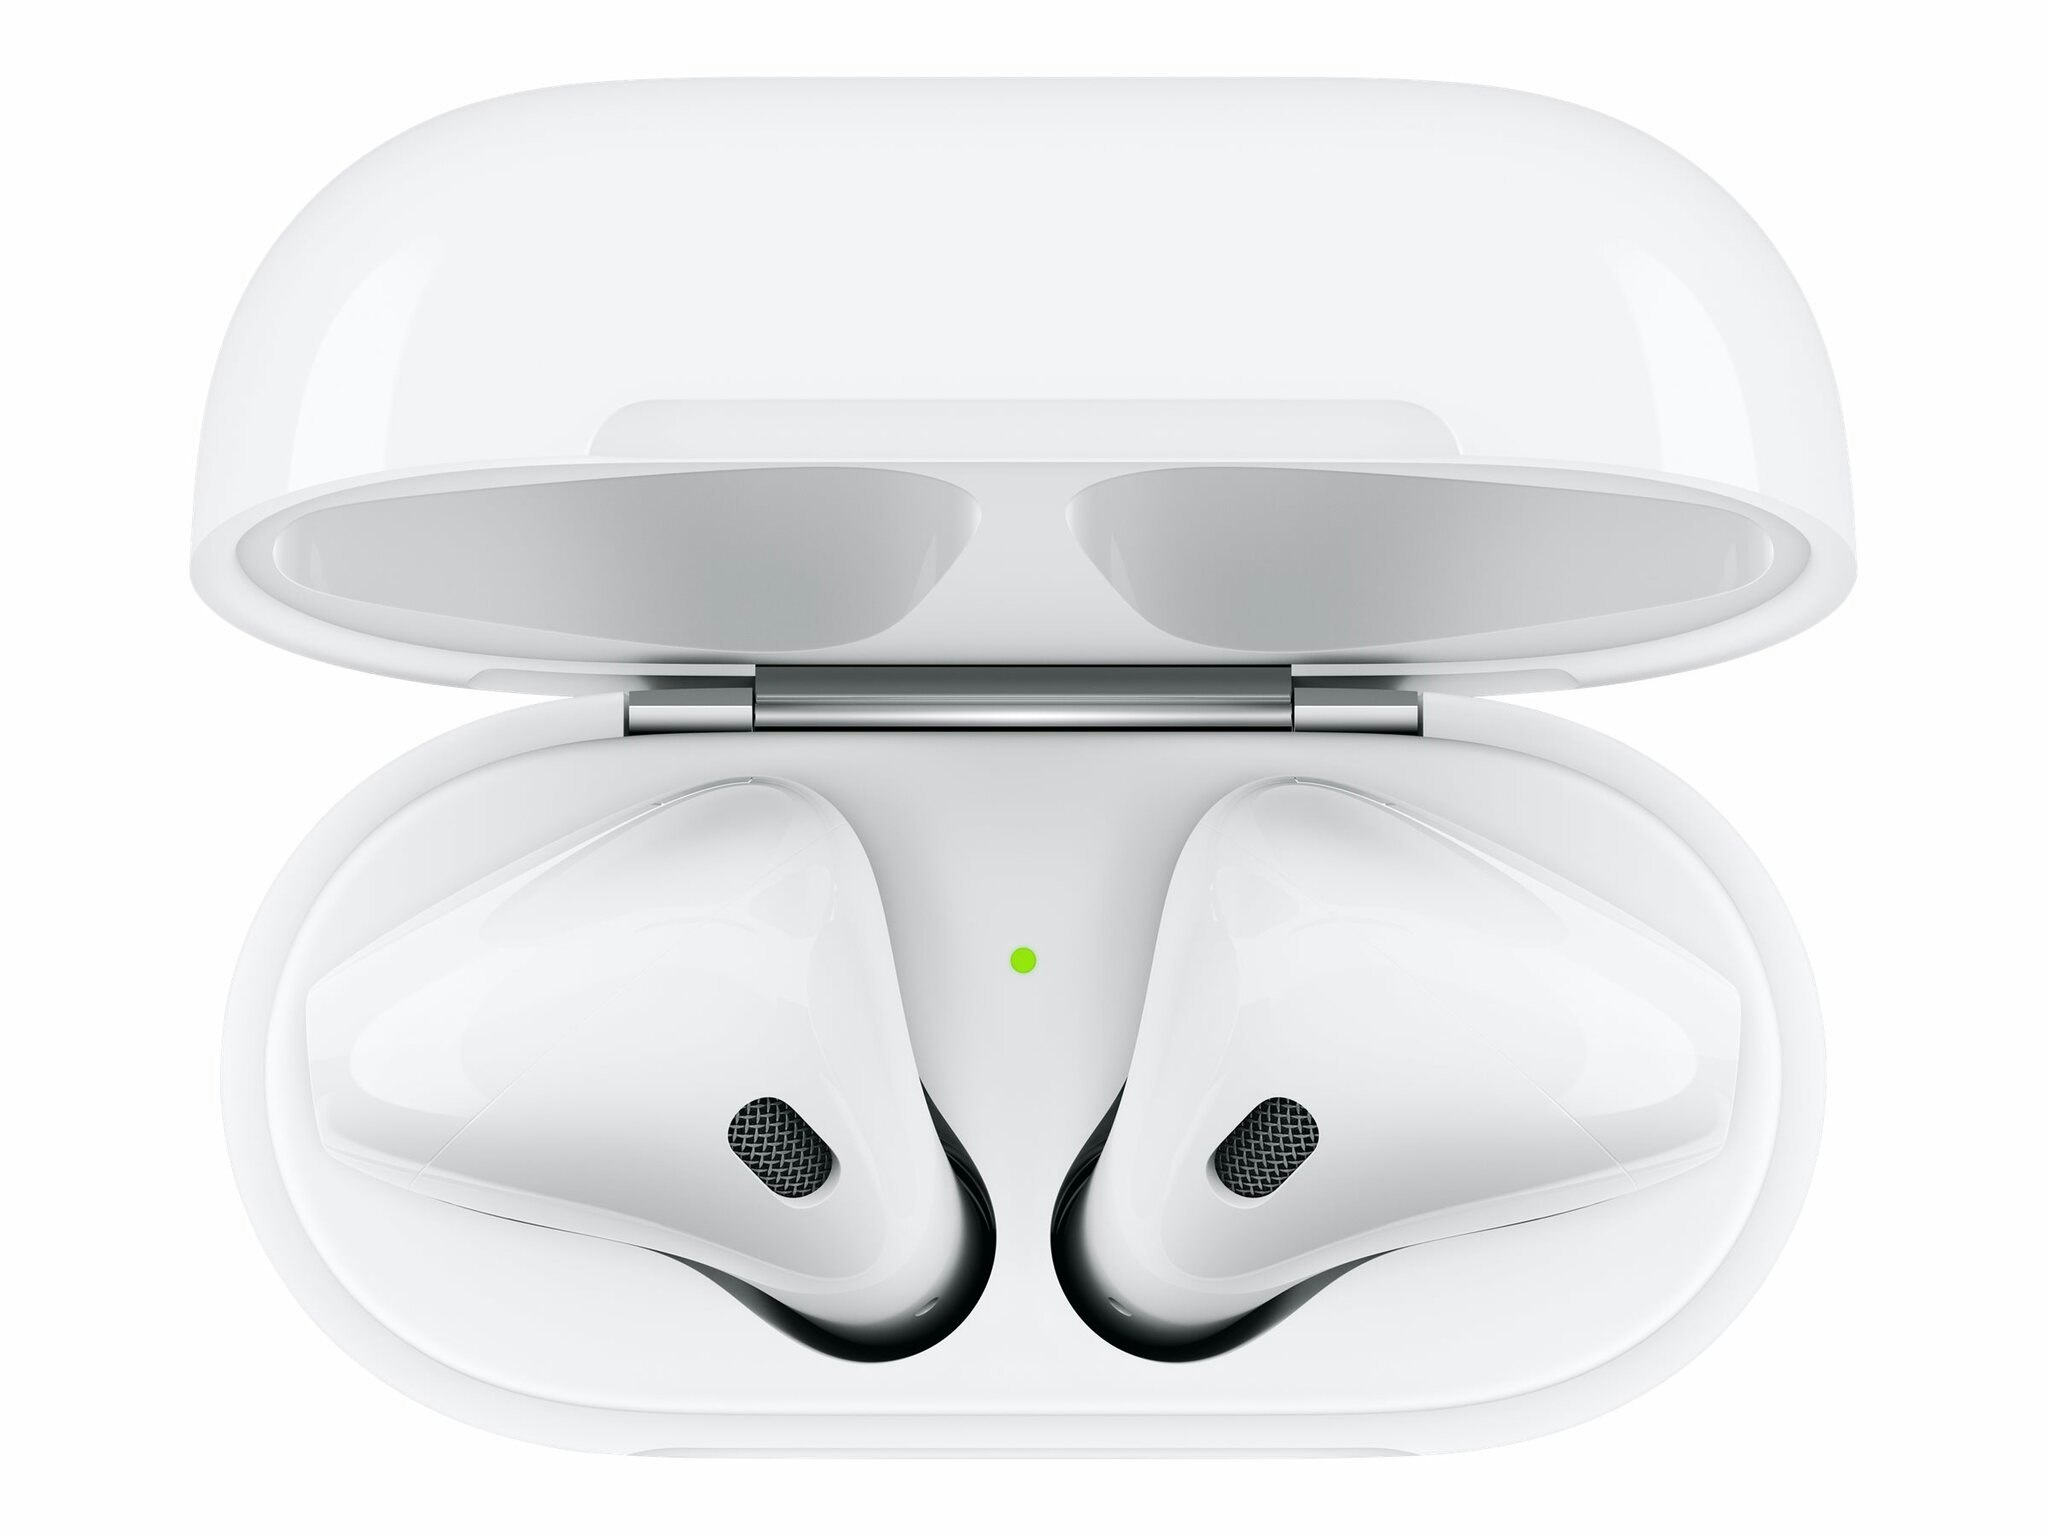 Apple AirPods 2nd Gen med laddningsetui